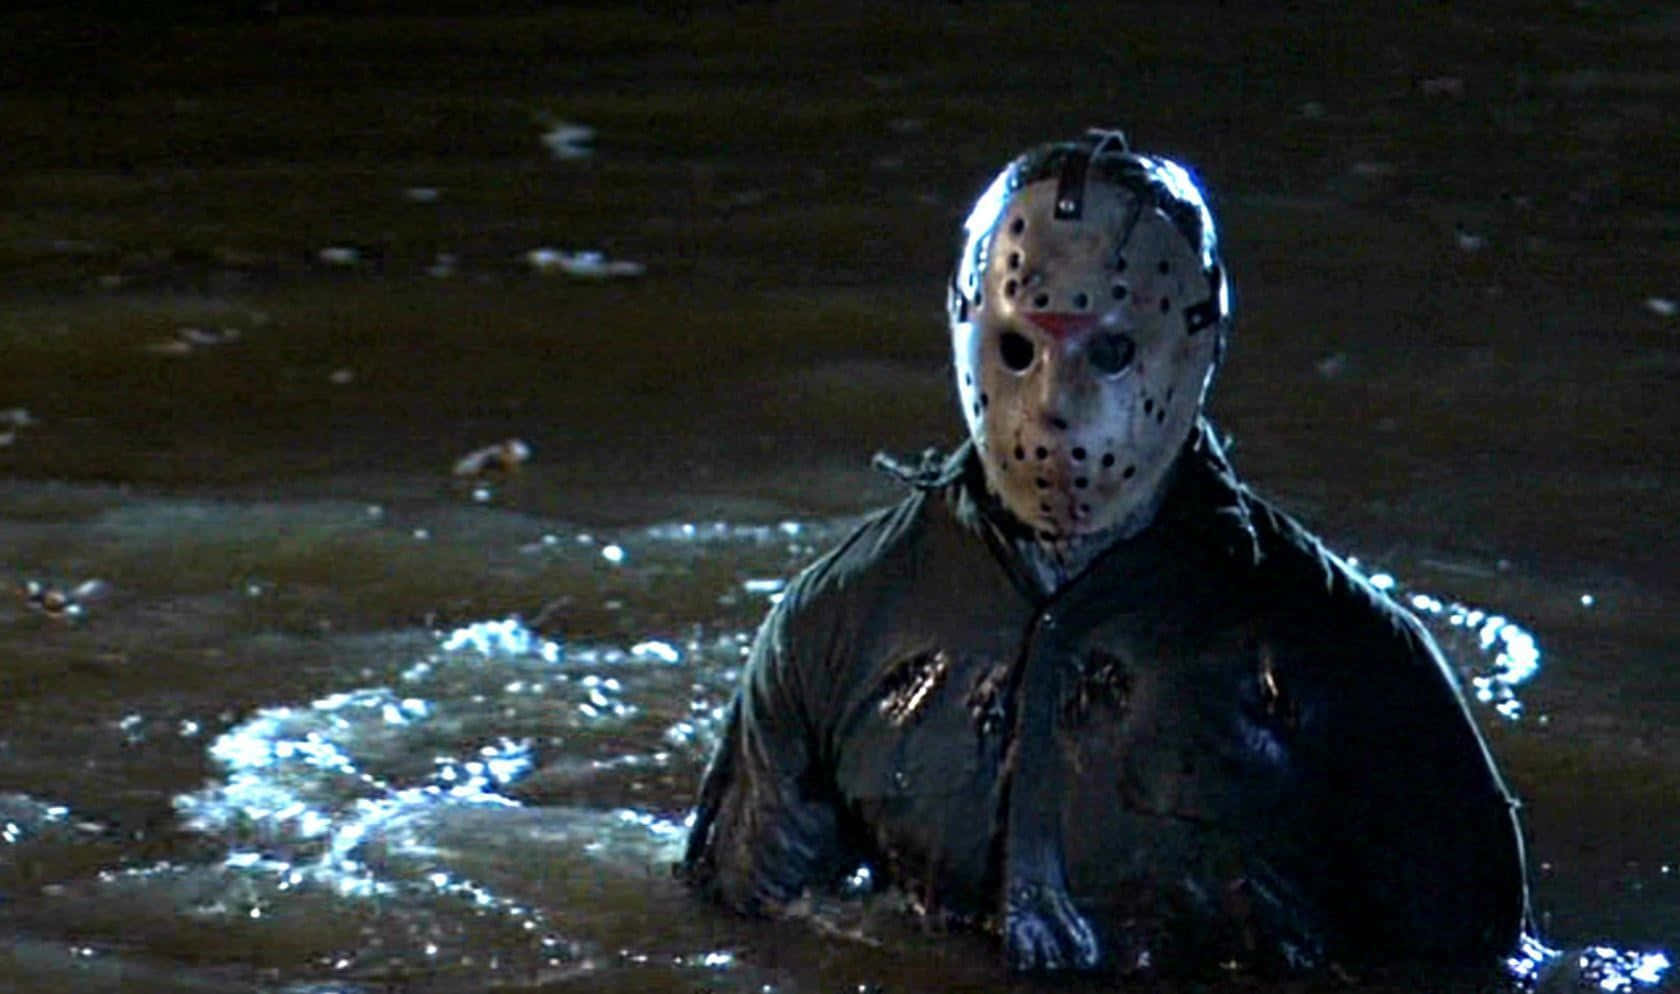 "Don't Mess With Jason Voorhees!"